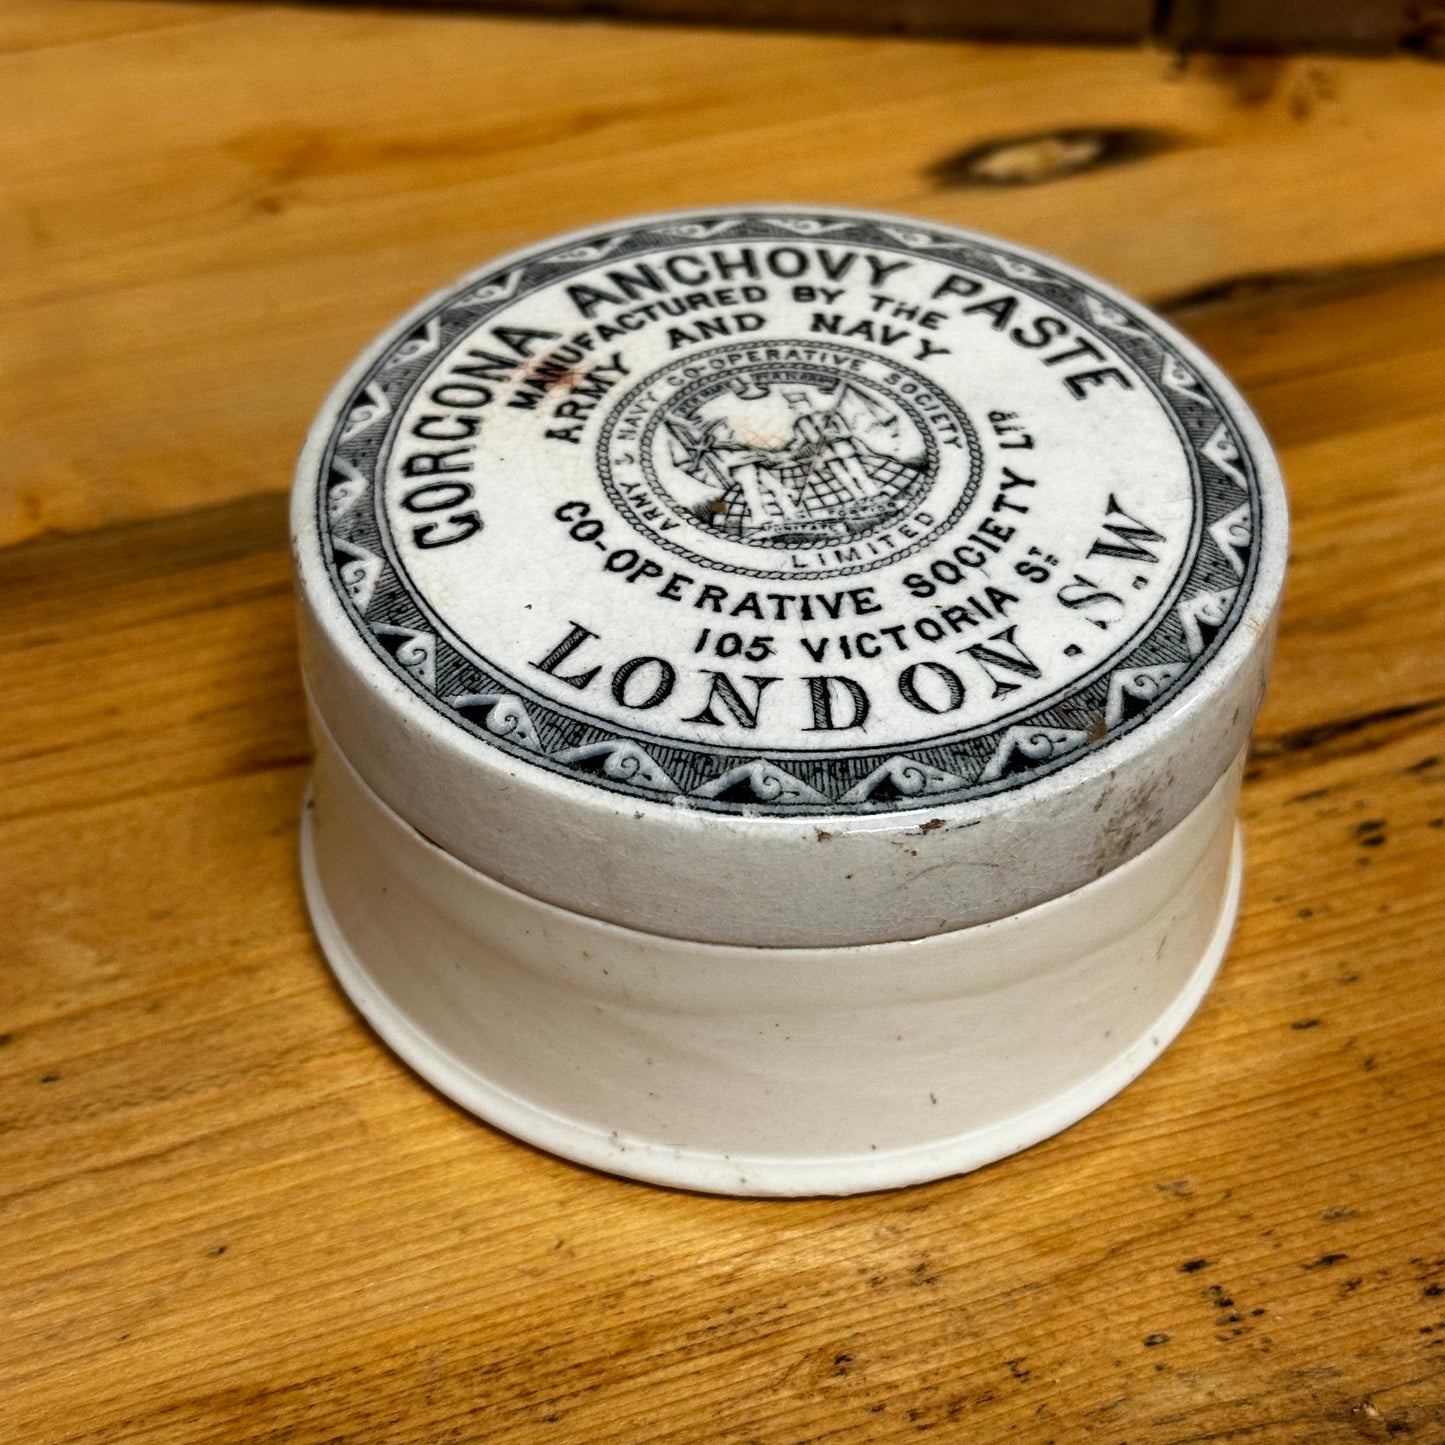 Army & Navy Gorgona Anchovy Paste Pot and Lid English Advertising London